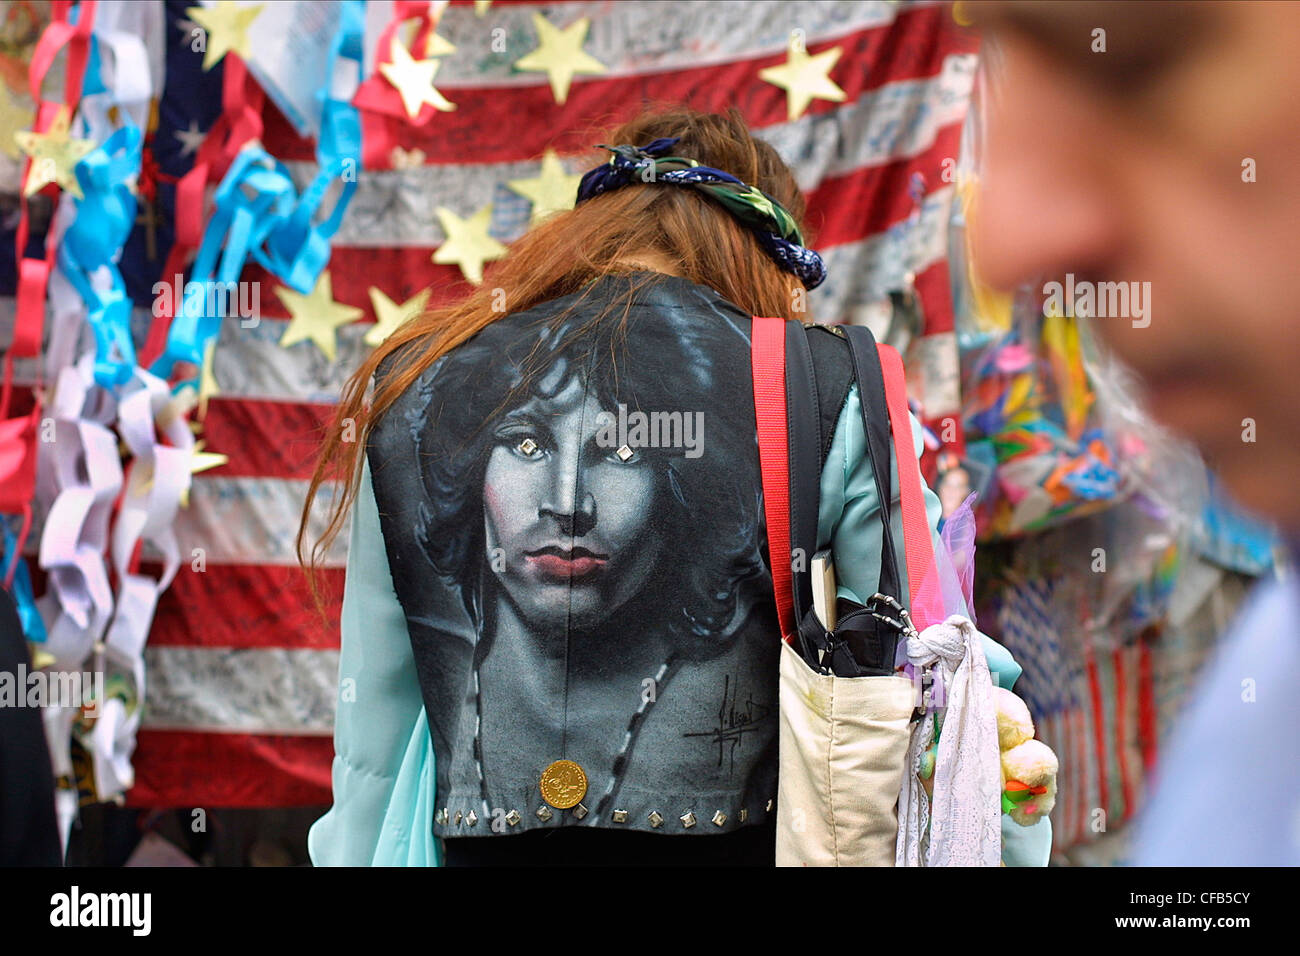 A woman with a Jim Morrison jacket visiting the Ground Zero 9/11 memorial Stock Photo